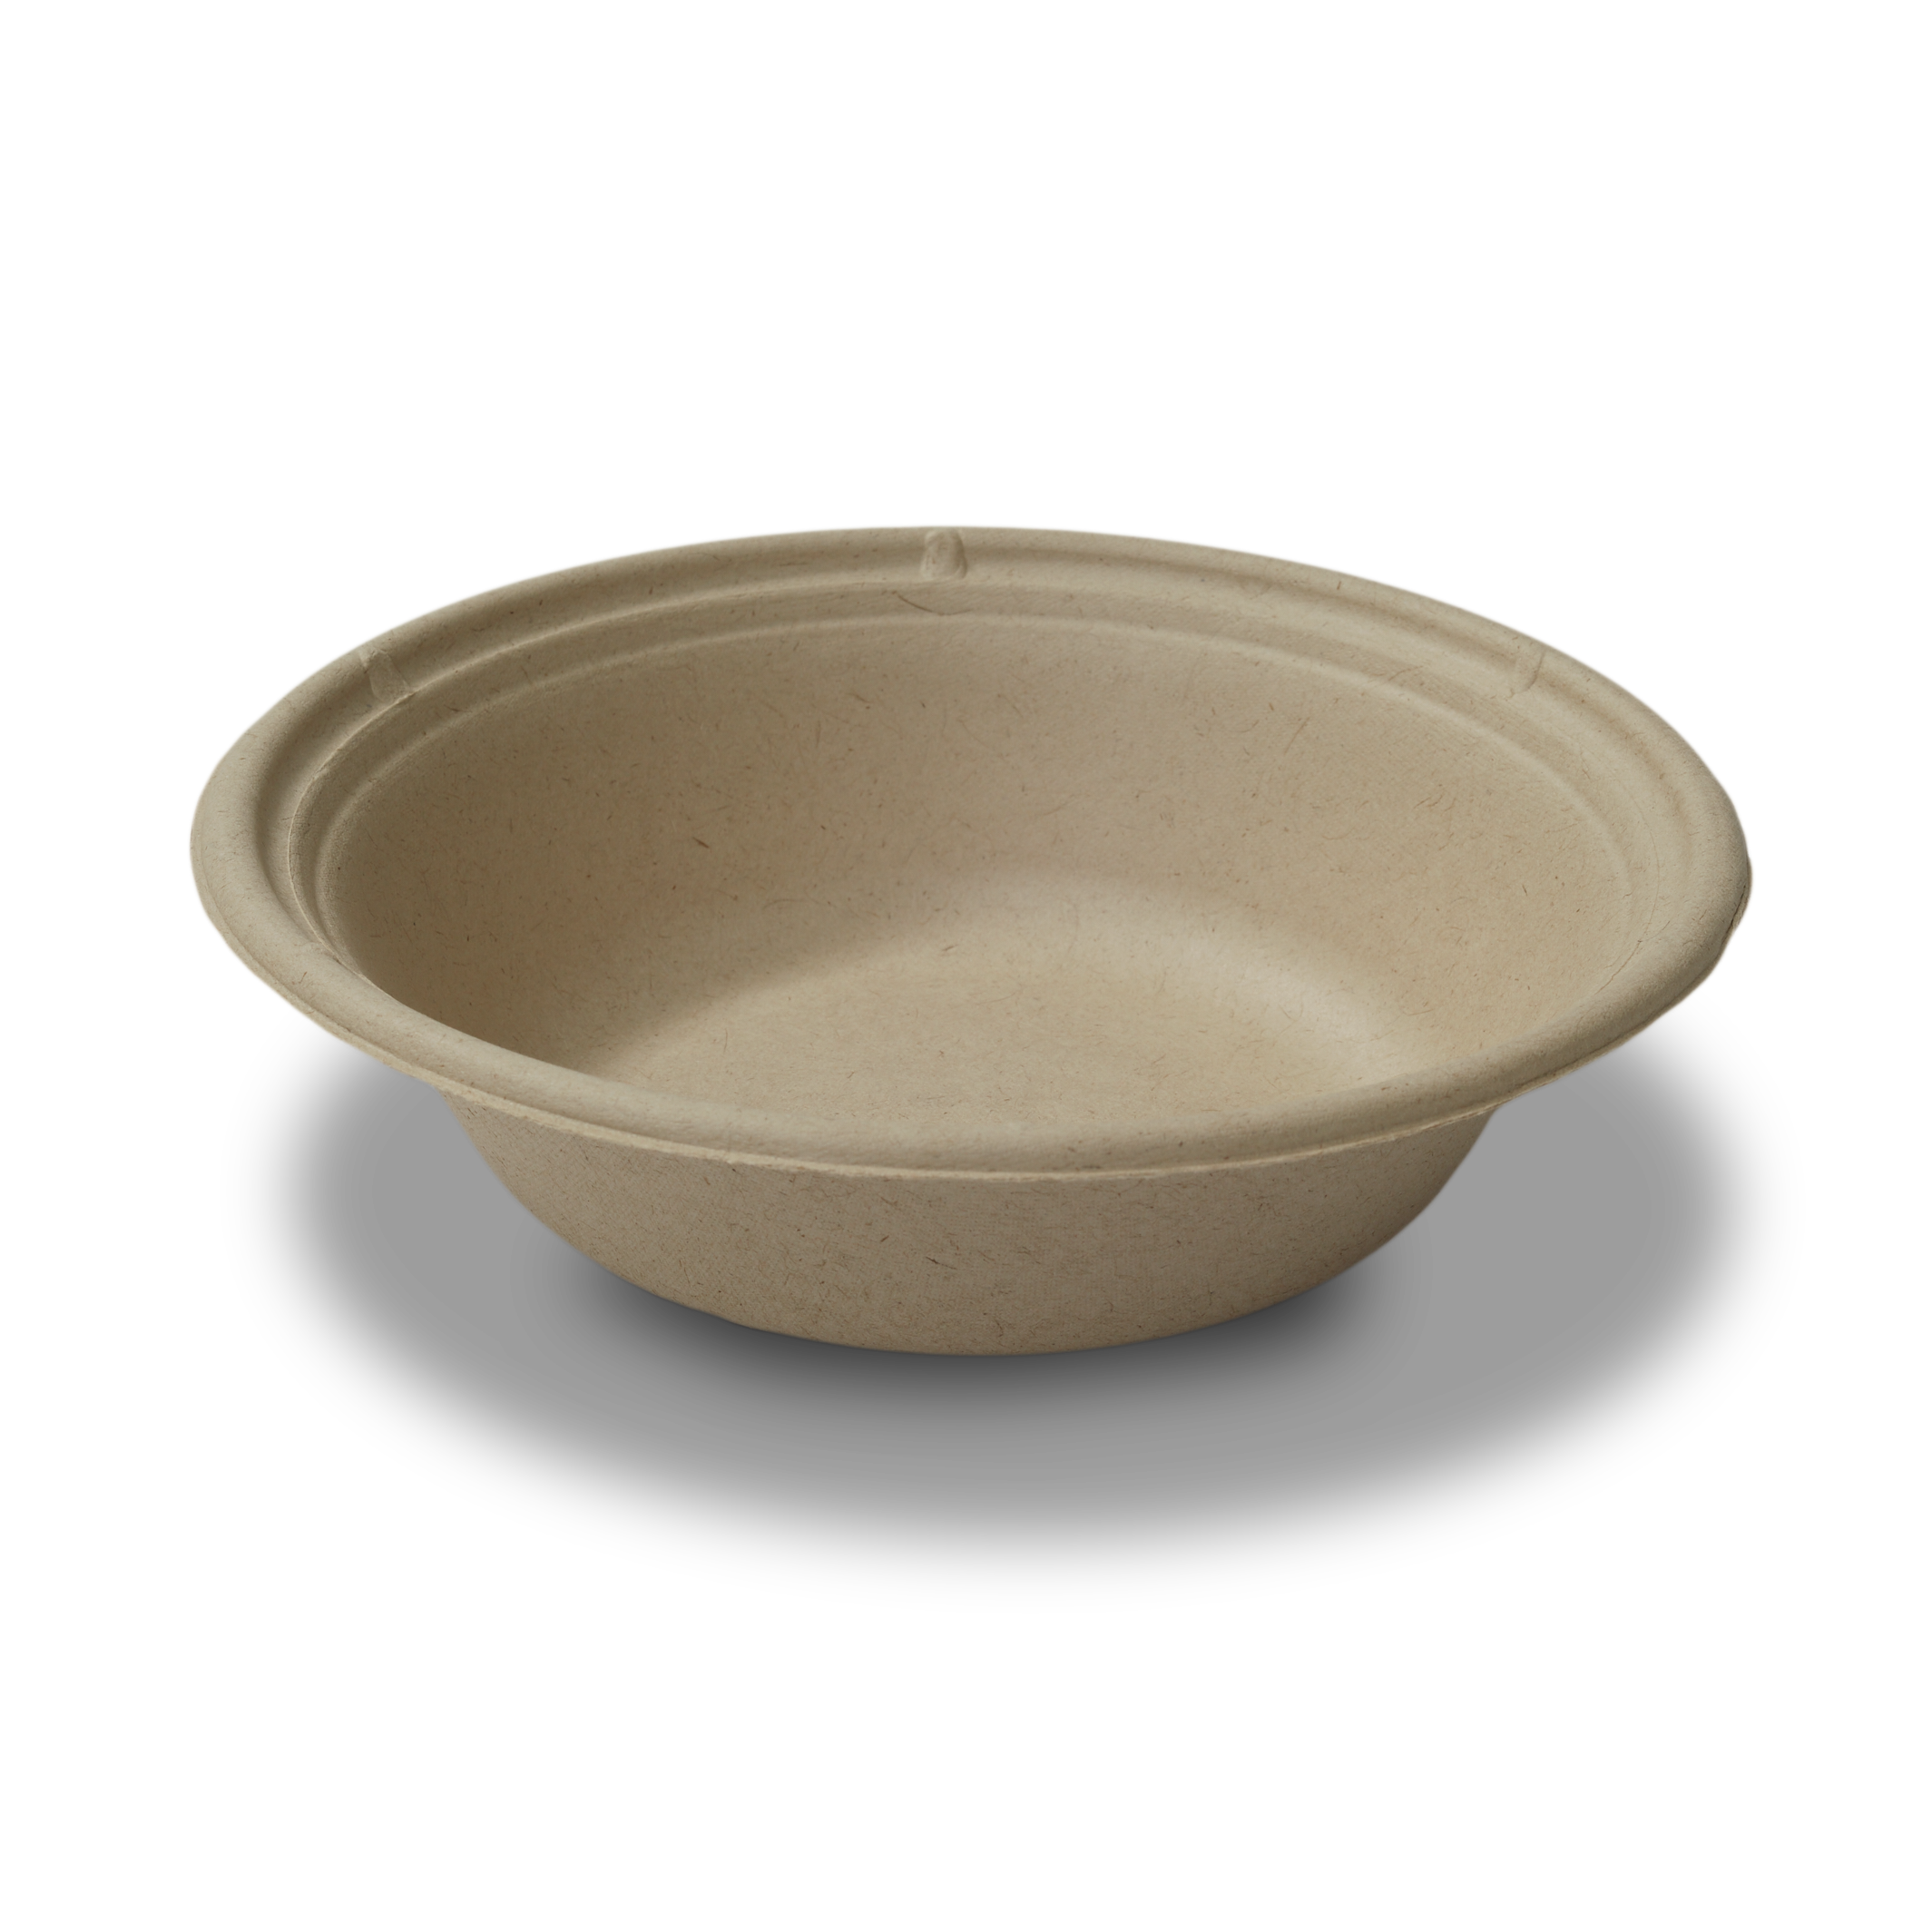 24 ounce biodegradable and compostable round bowl with a light kraft brown color. Made in the USA from Florida grown sugarcane bagasse and other plant fibers. The top edge has a lip to help fit an available matching flat or dome lid.